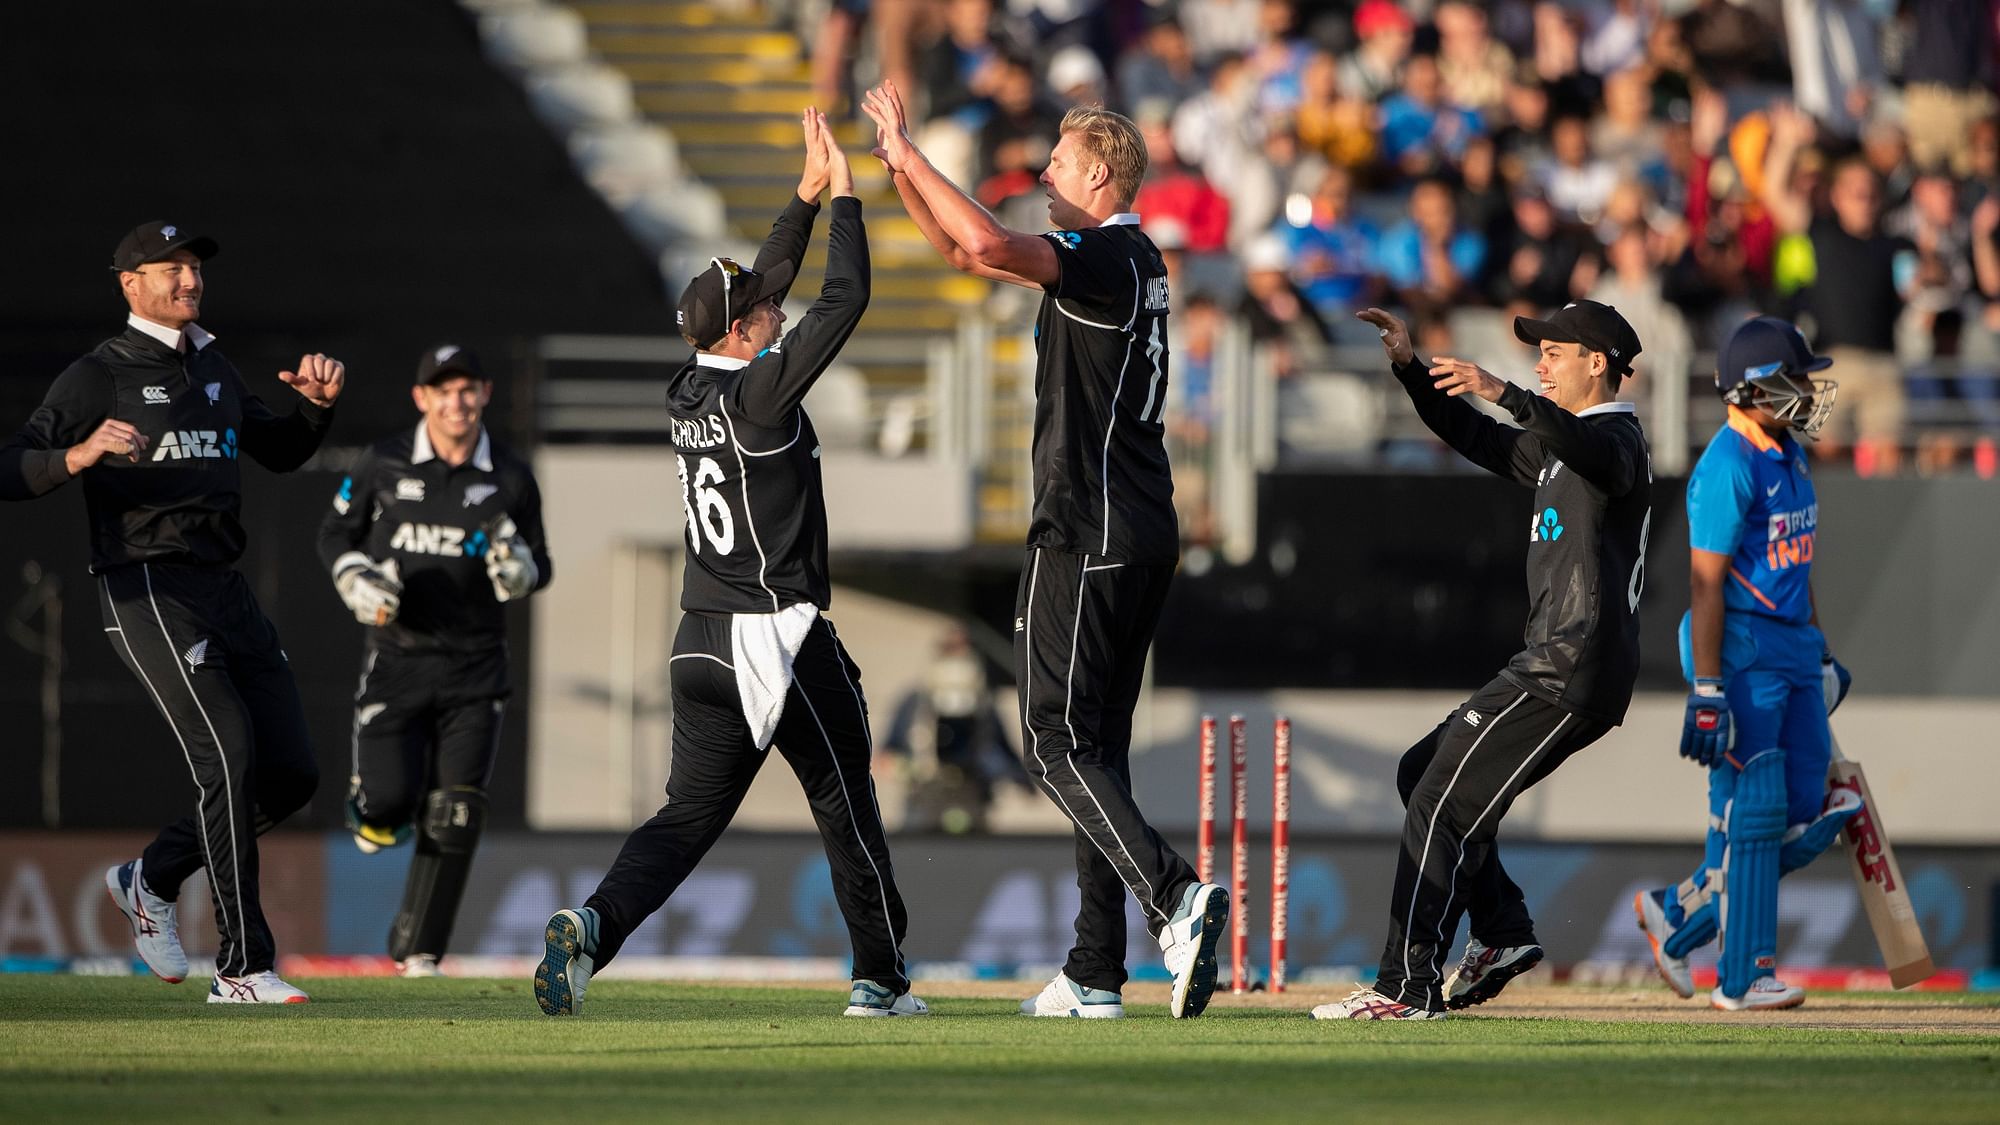 New Zealand beat India by five wickets in the third ODI at Mount Maunganai.